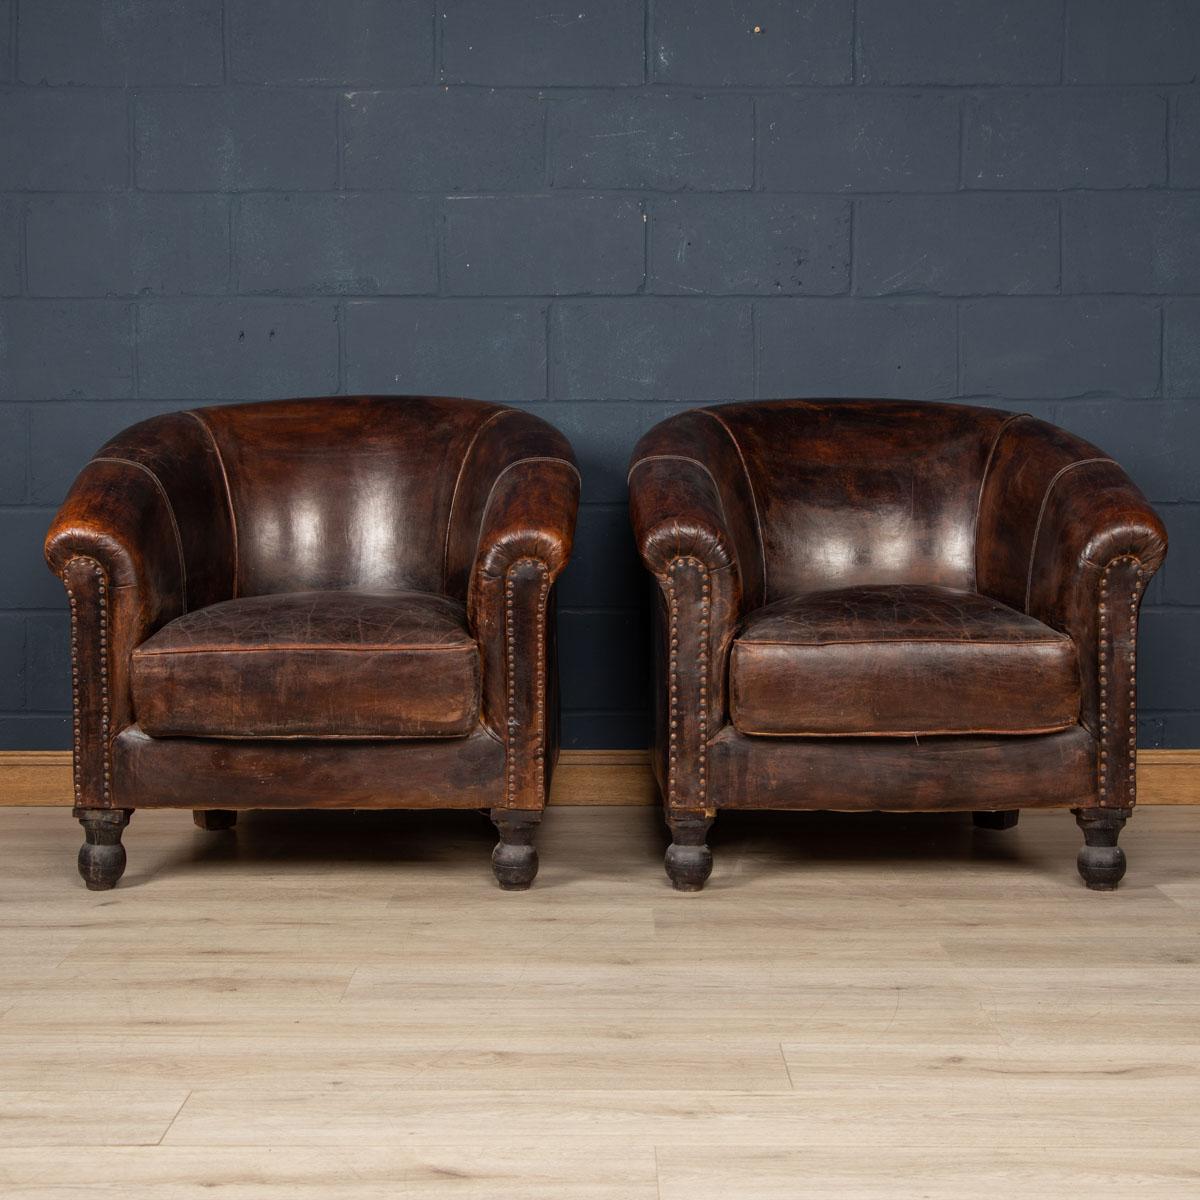 Showing superb patina and colour, this wonderful pair of tub chairs were hand upholstered sheepskin leather in Holland by the finest craftsmen in the latter part of the 20th century. This particular set is oversized, probably a custom